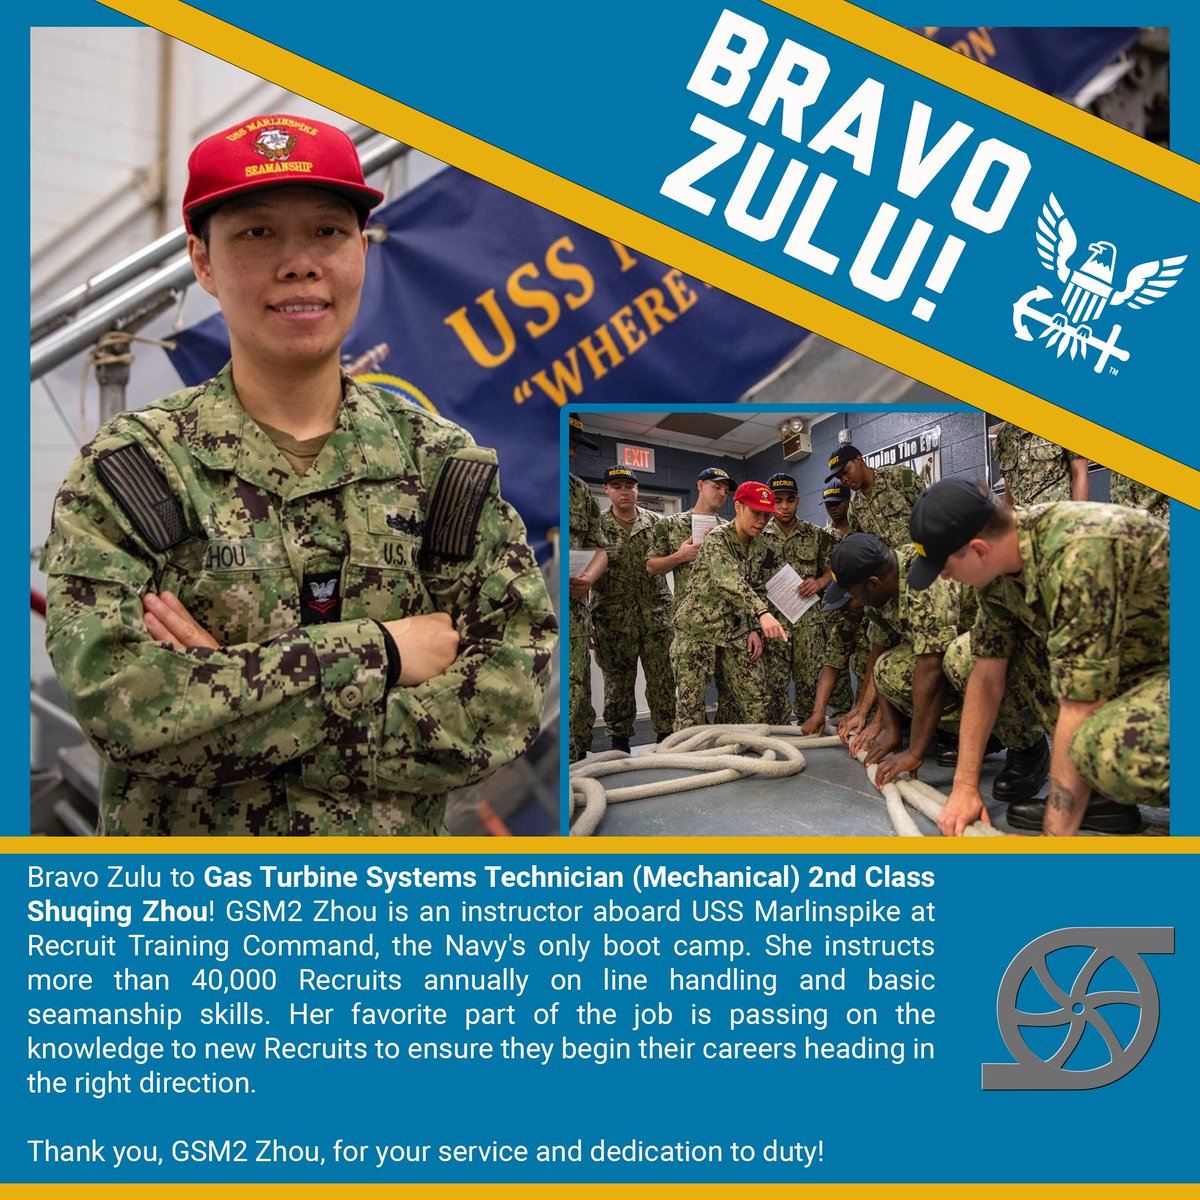 Bravo Zulu to Gas Turbine Systems Technician (Mechanical) 2nd Class Shuqing Zhou! 🎉 At @NavyRTC, she aims to pass along a crucial lesson to every future Sailor, “It’s okay to laugh and love who you are, but remember what you represent.” ⚓